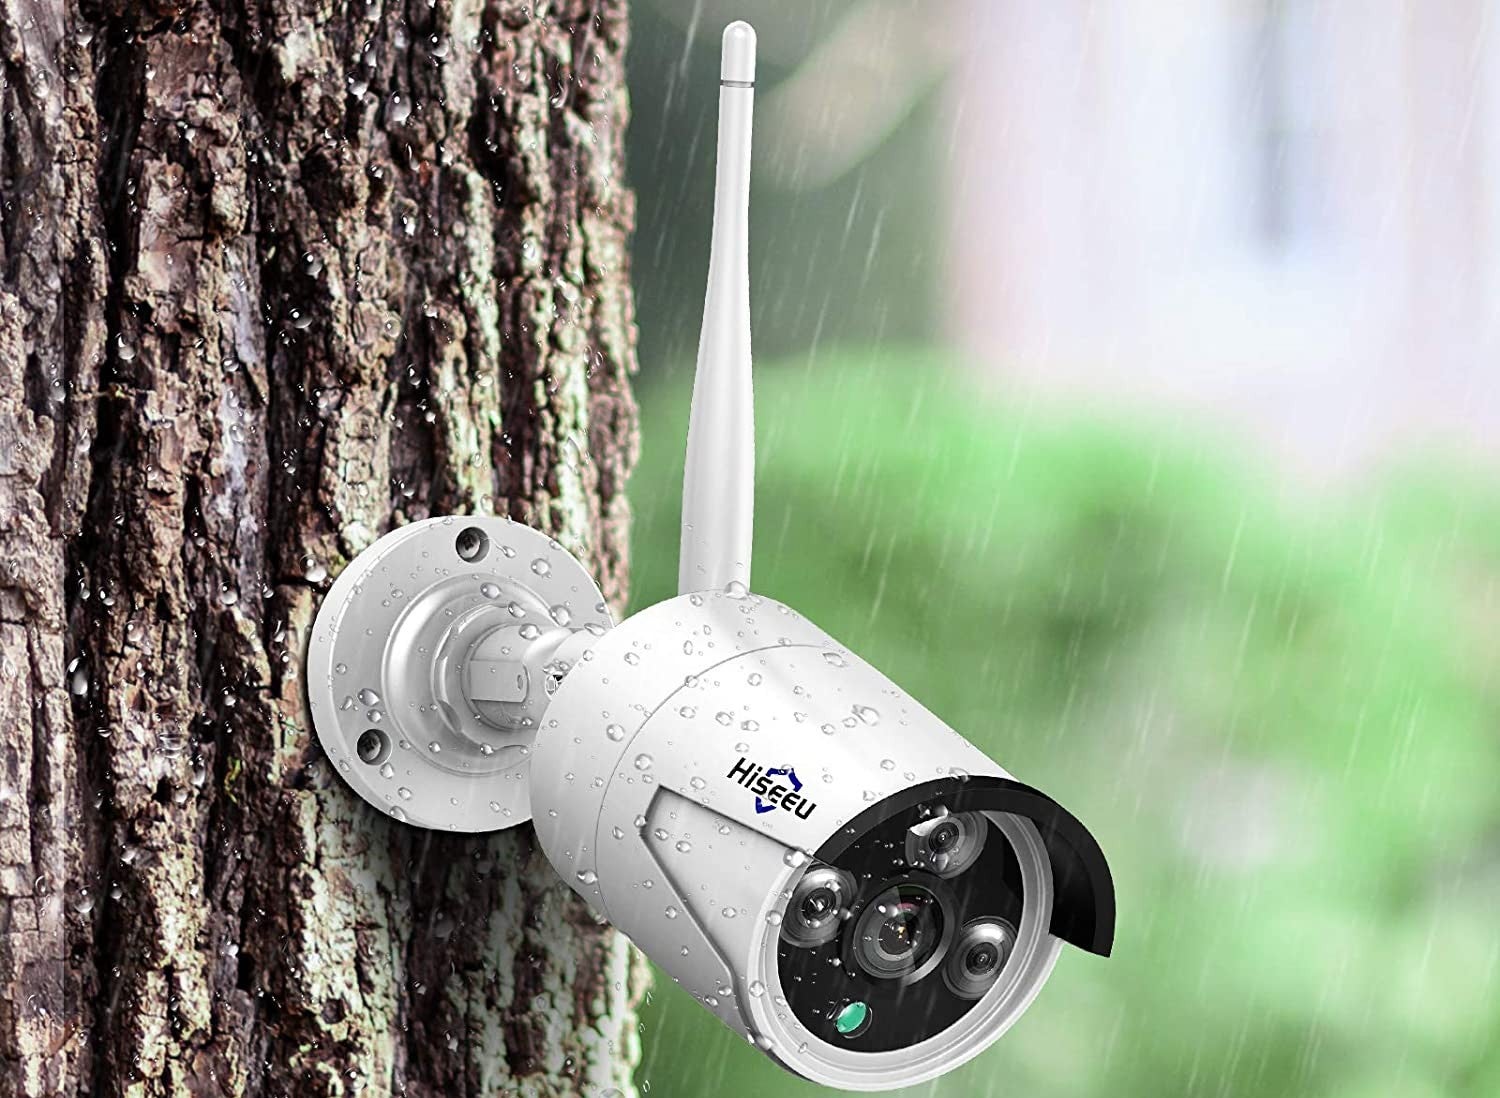 Advantages and disadvantages of an IP camera